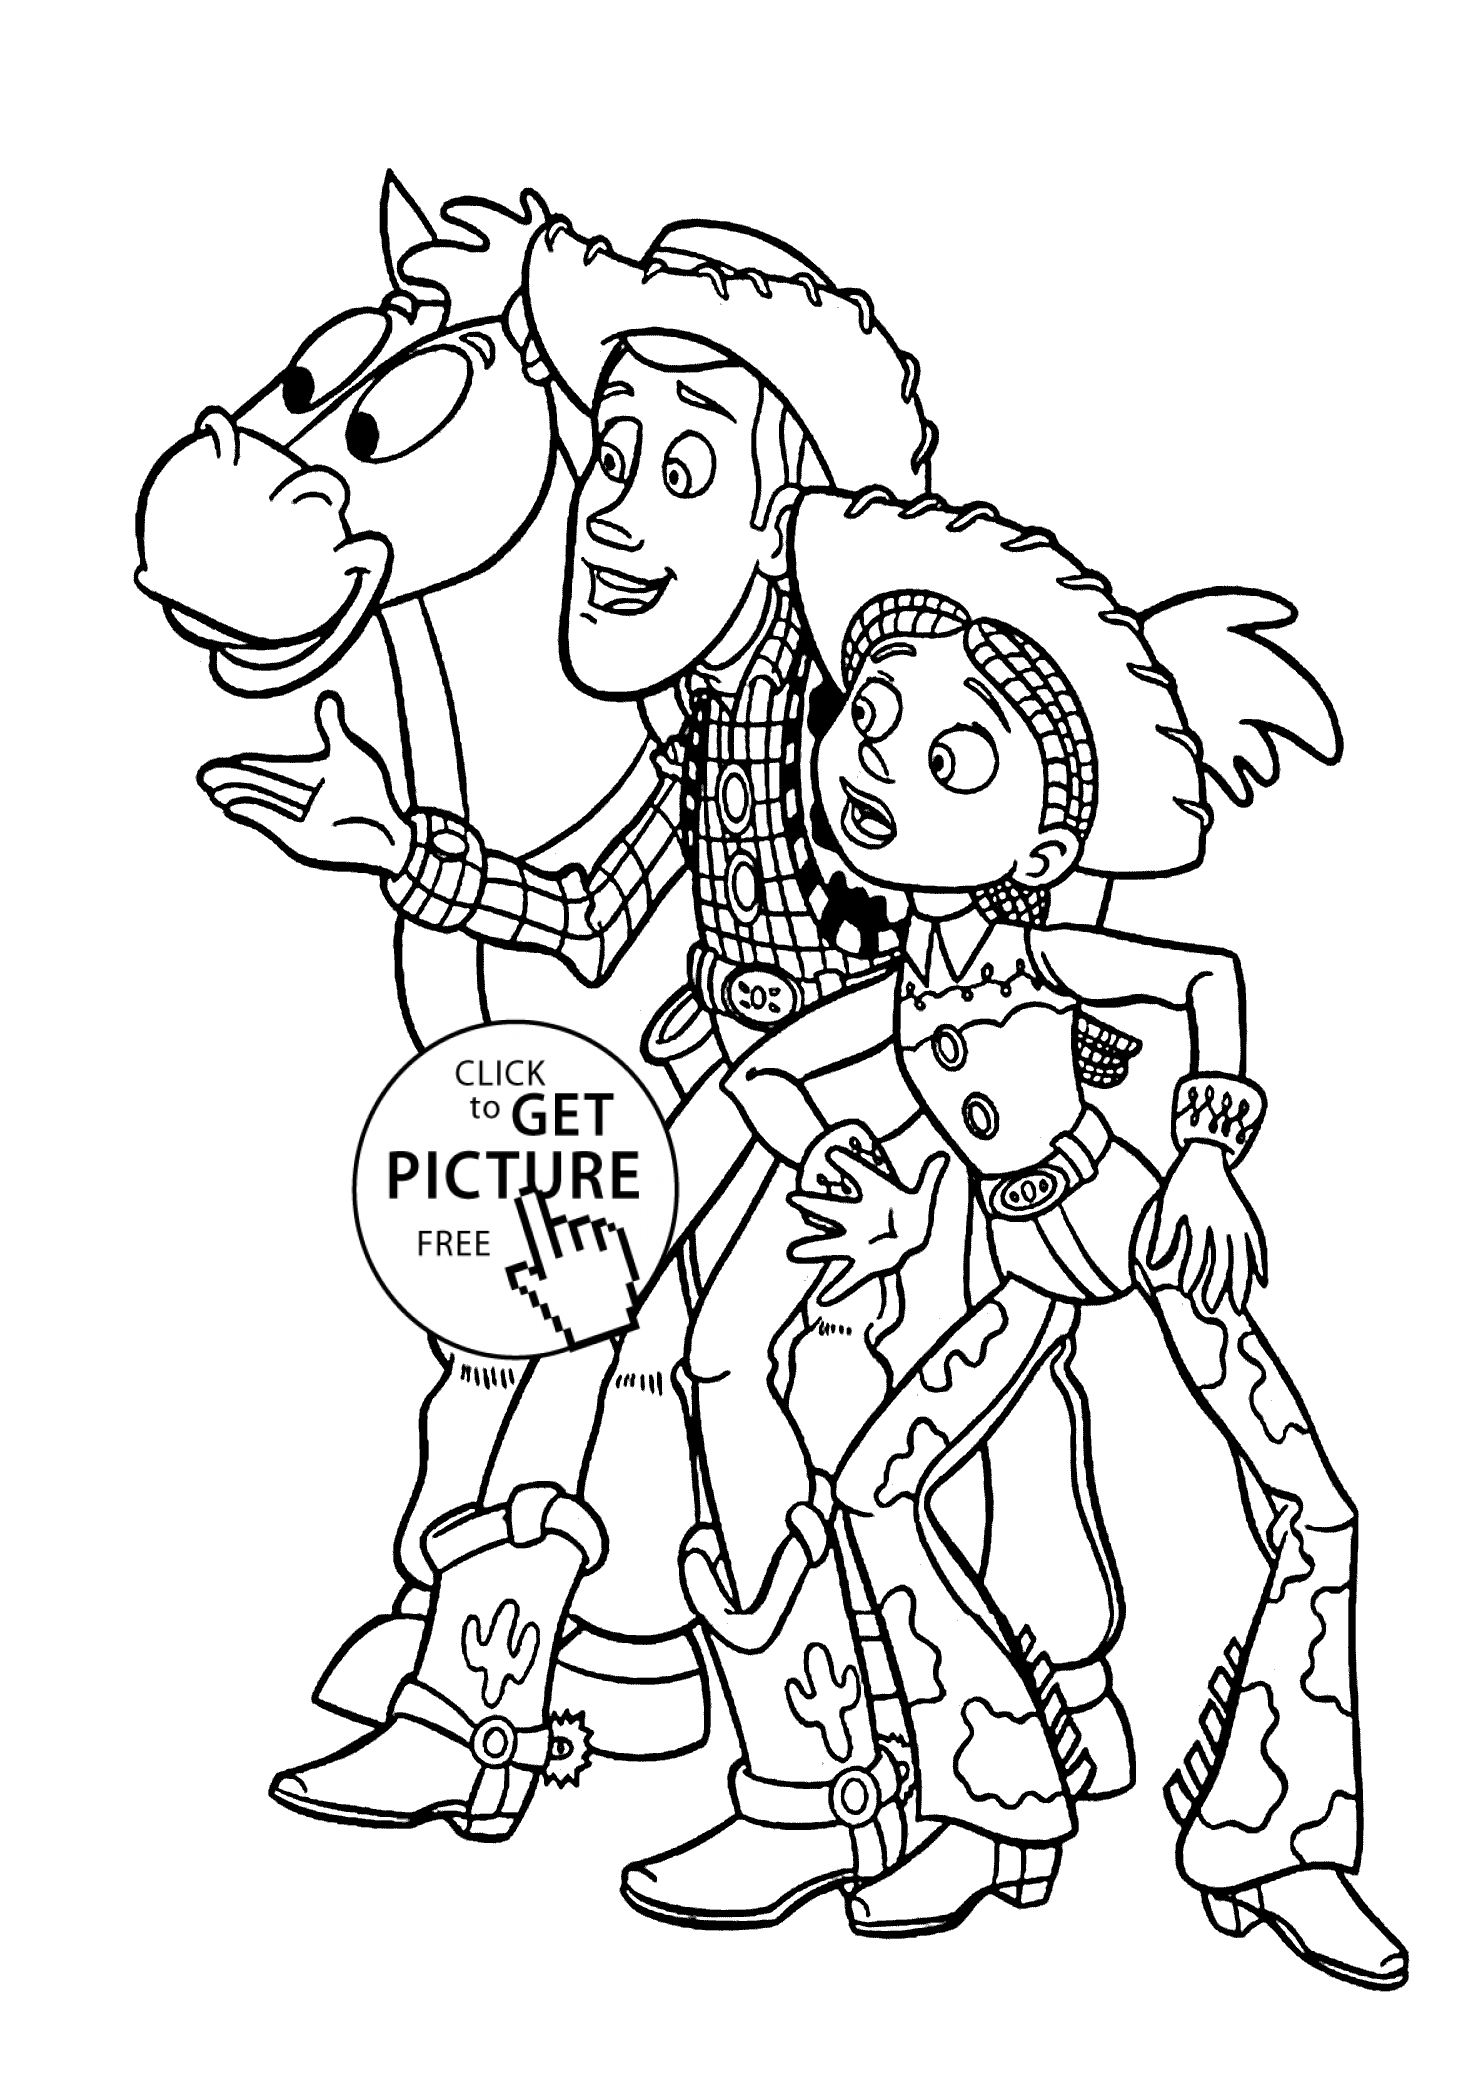 Story Coloring Pages Cowboys From Toy Story Coloring Pages For Kids Printable Free